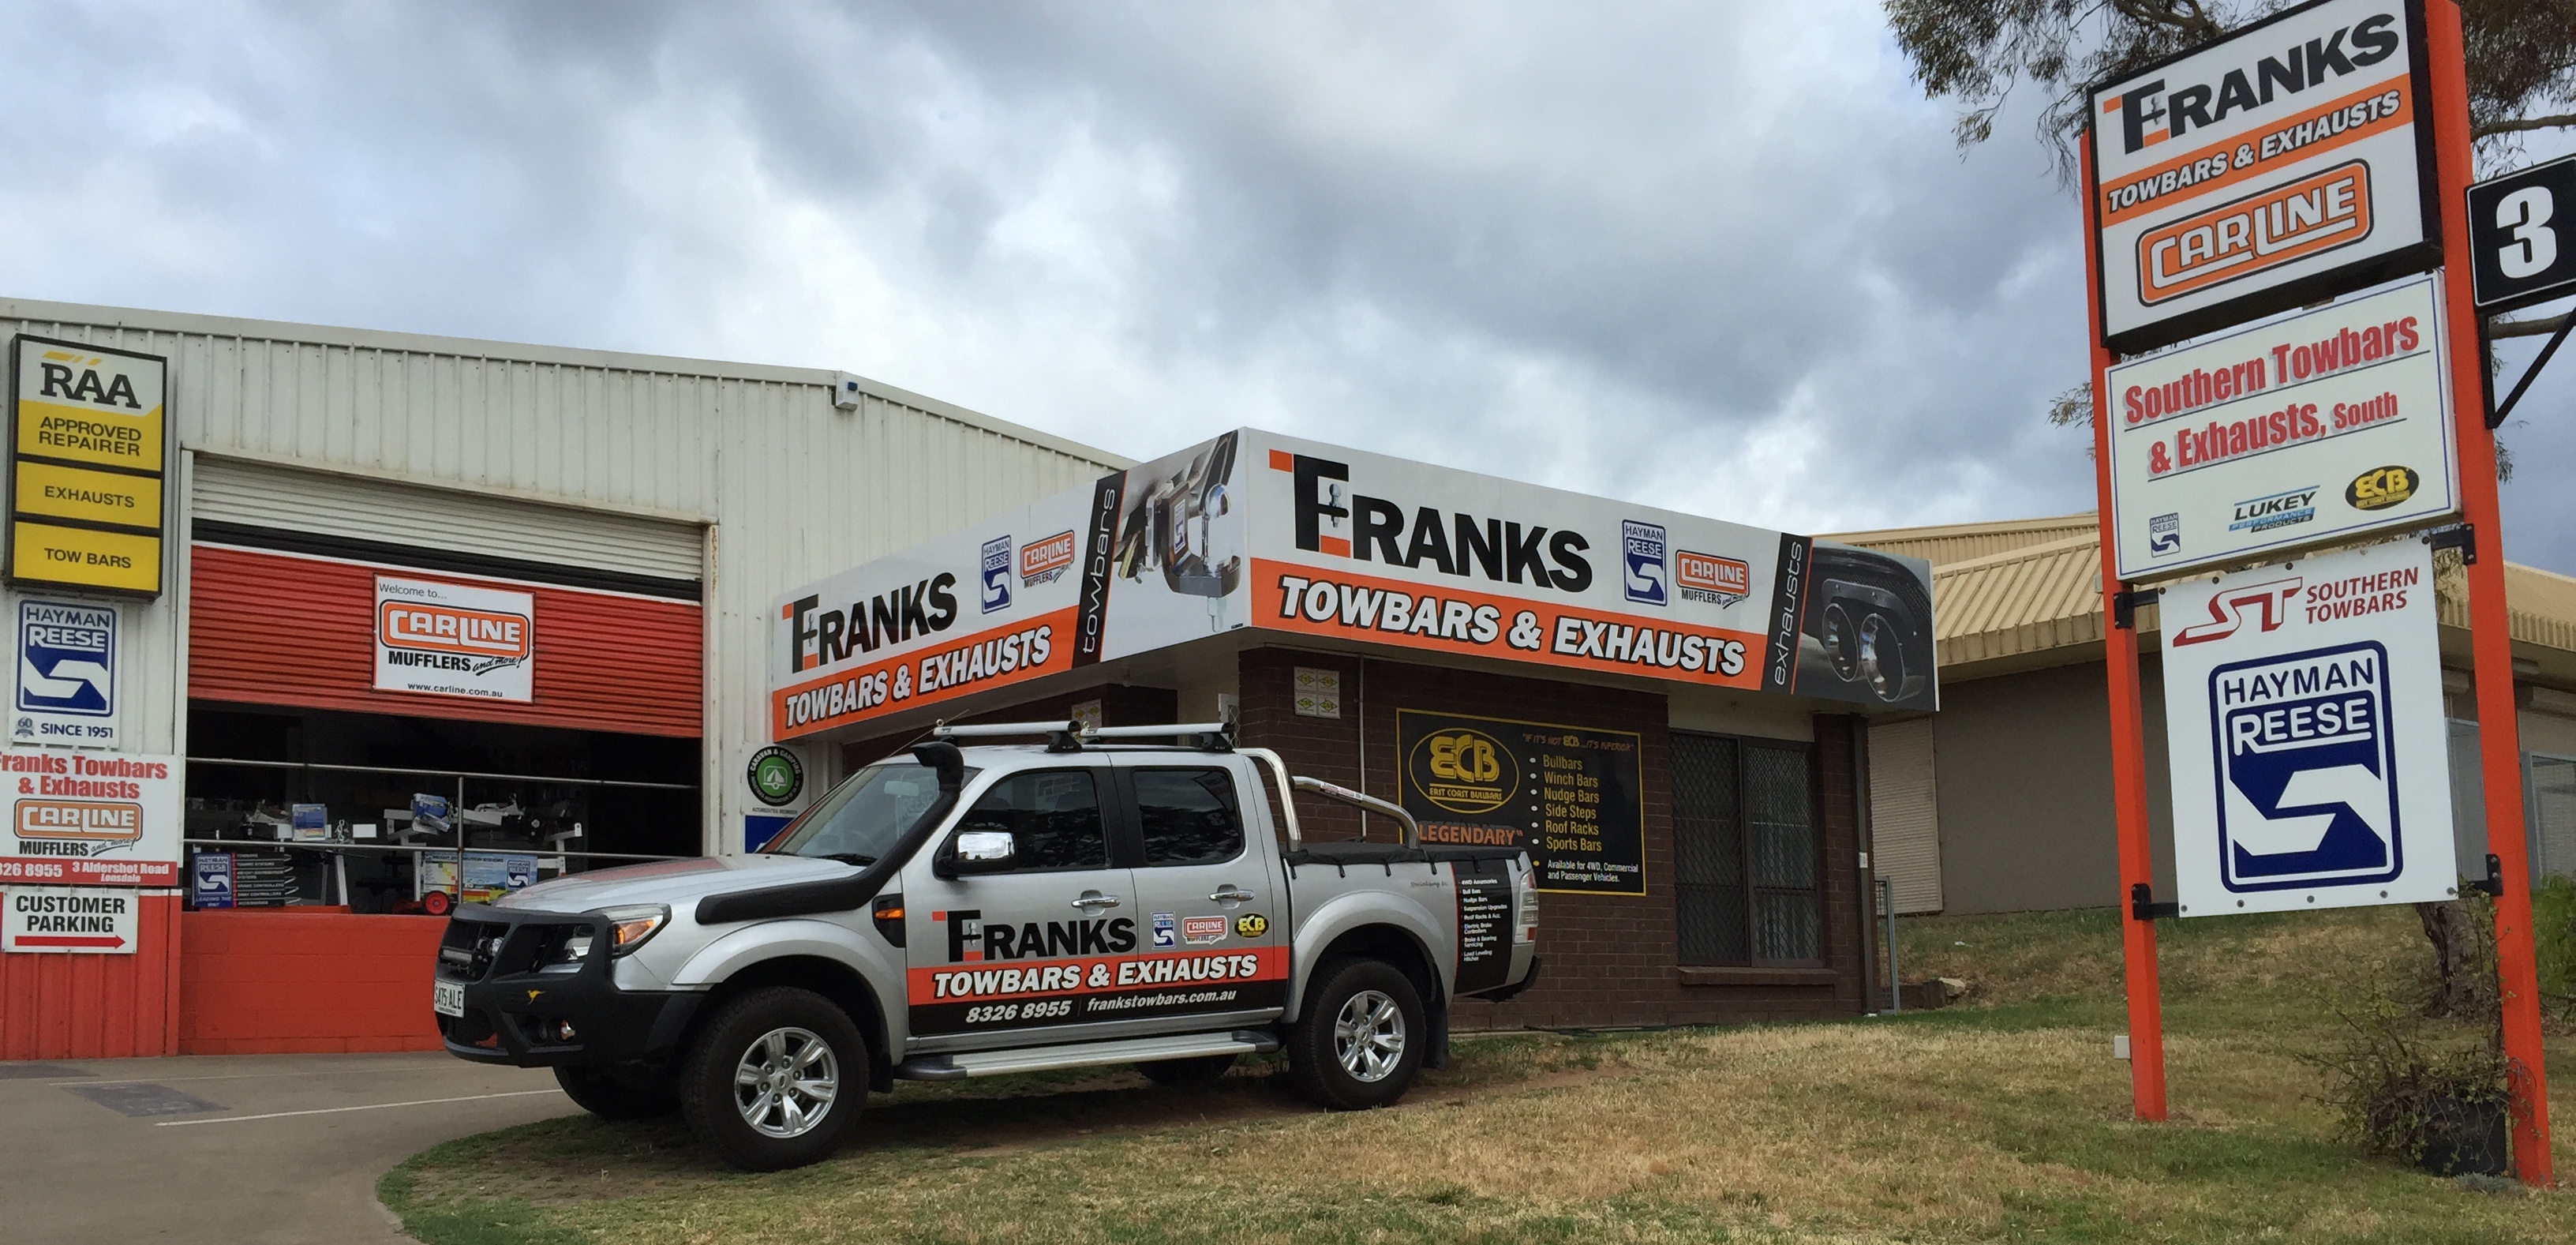 Franks Towbars & Exhausts